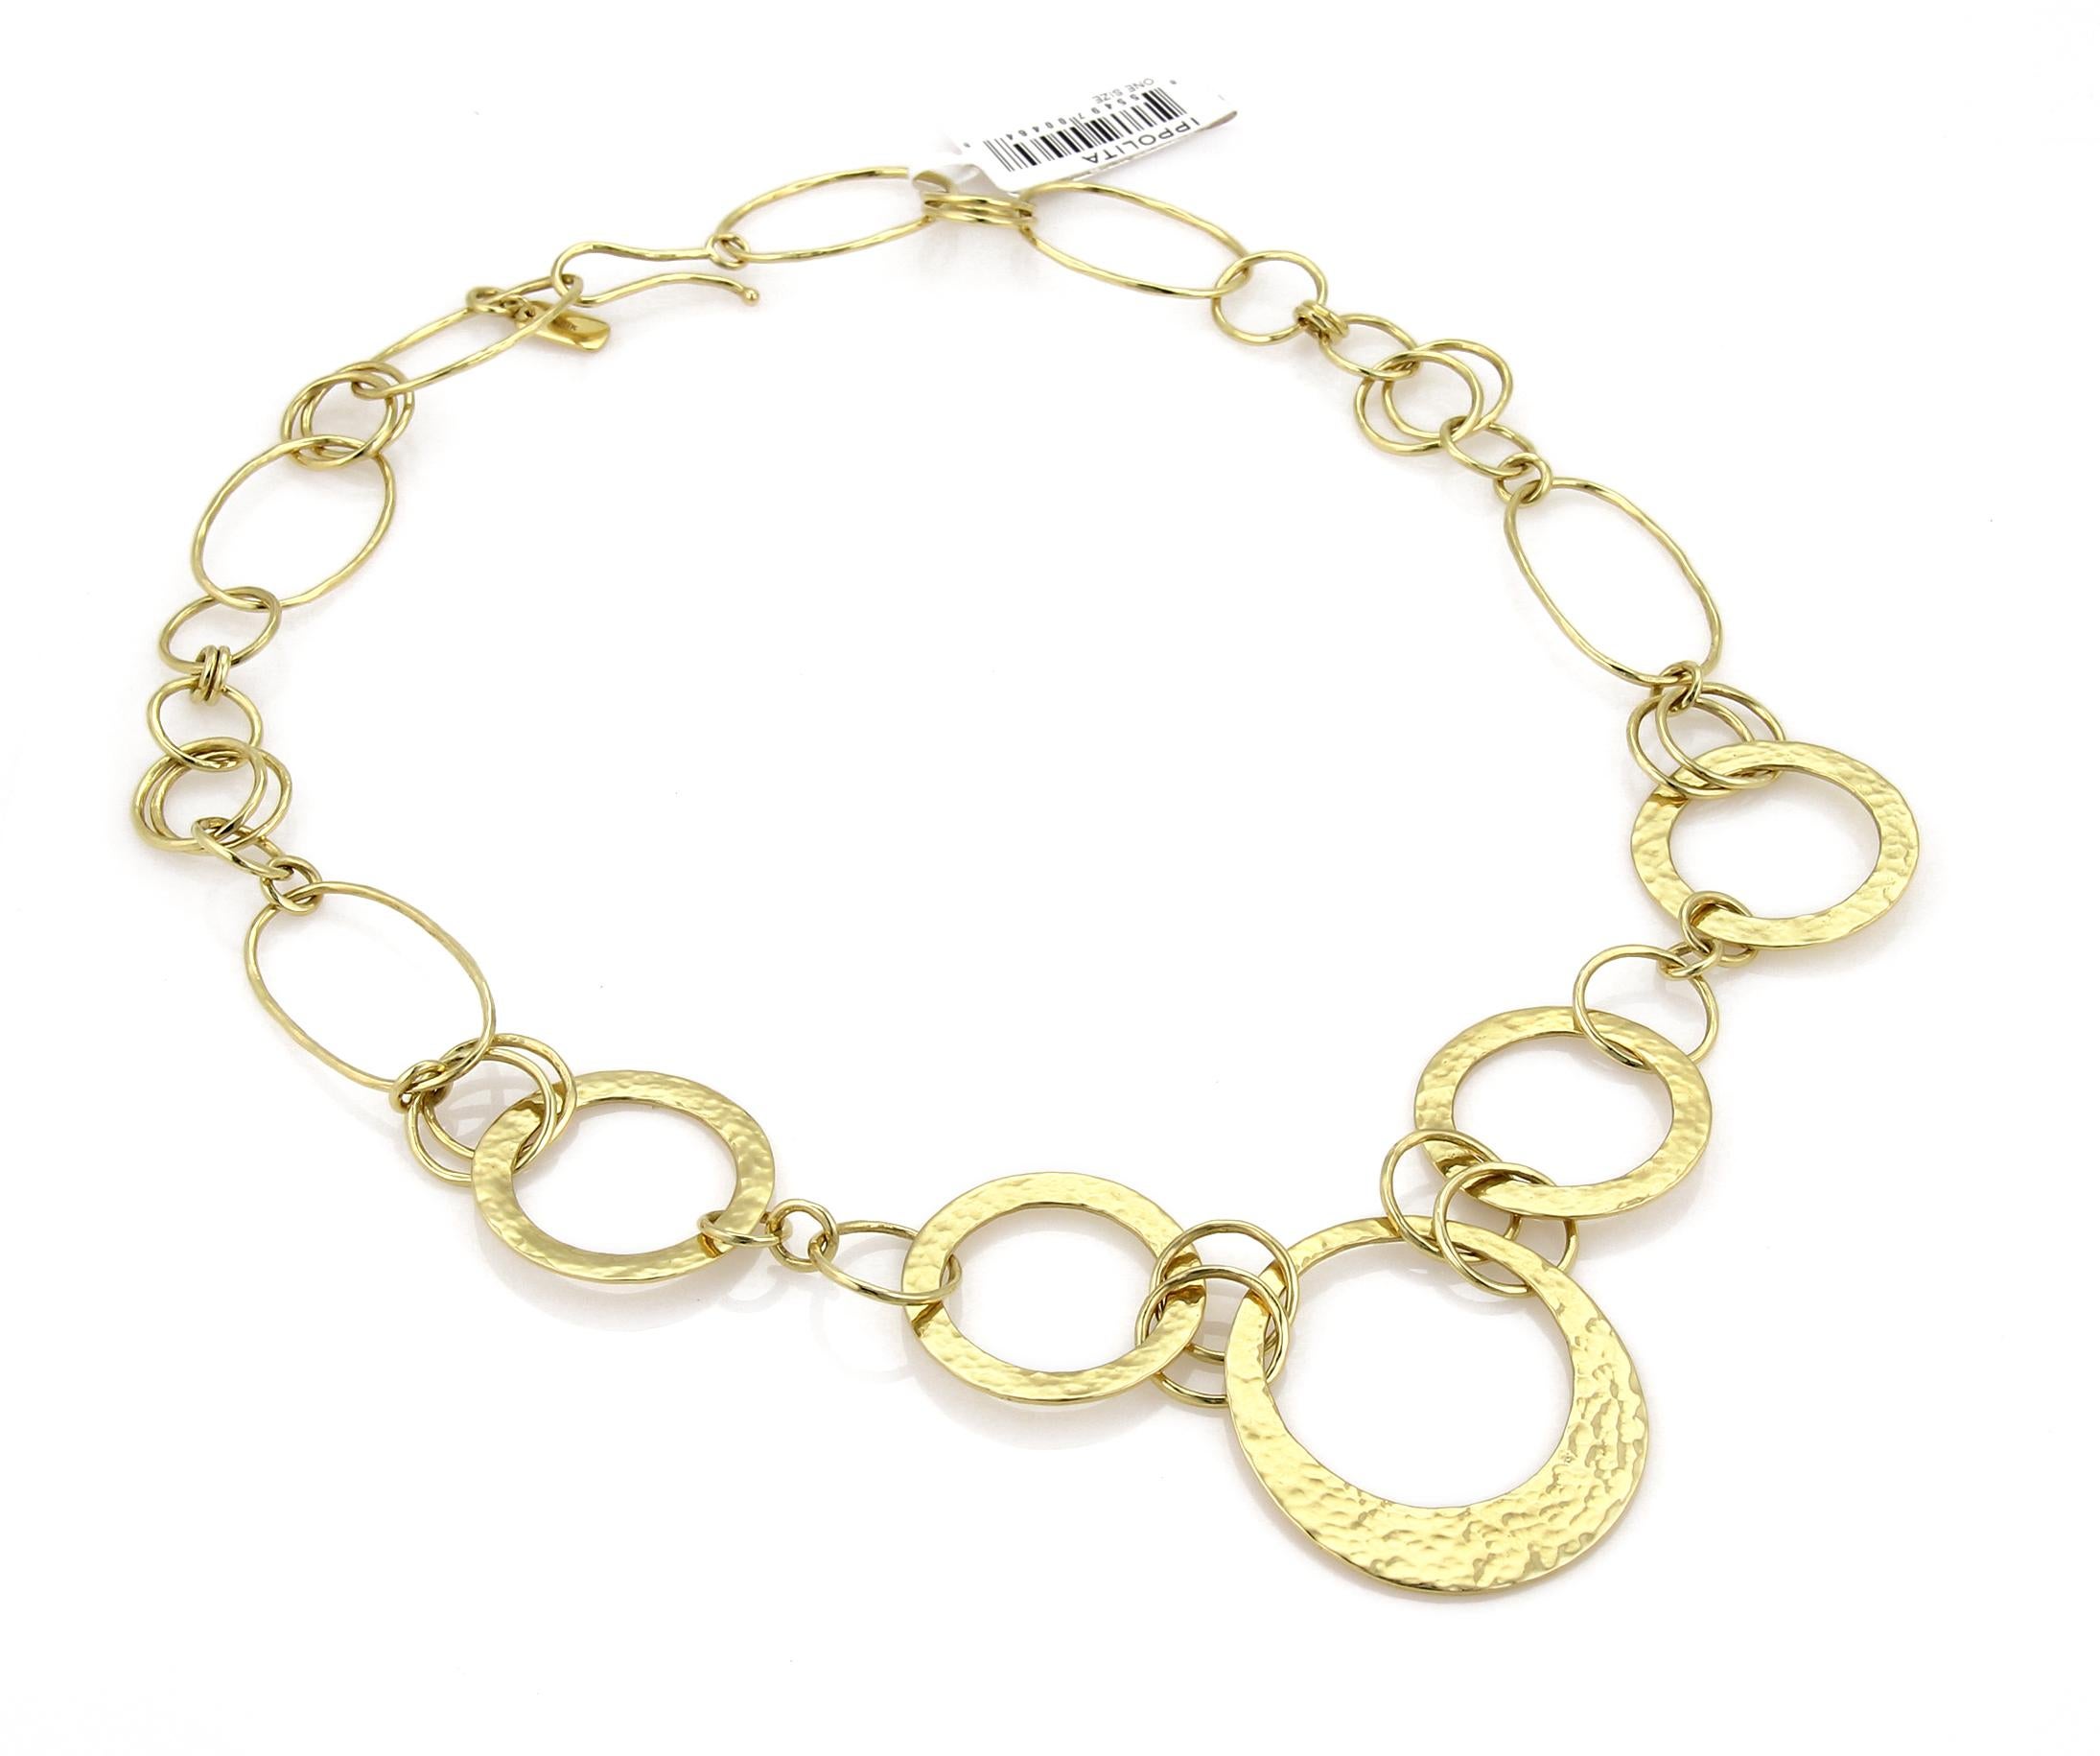 This lovely fashionable authentic necklace is by Ippolita, it is crafted from 18k yellow gold in a polished finish. The necklace has round and oval shape slim and wide flat hammered links. The front center has the hammered design round link and is